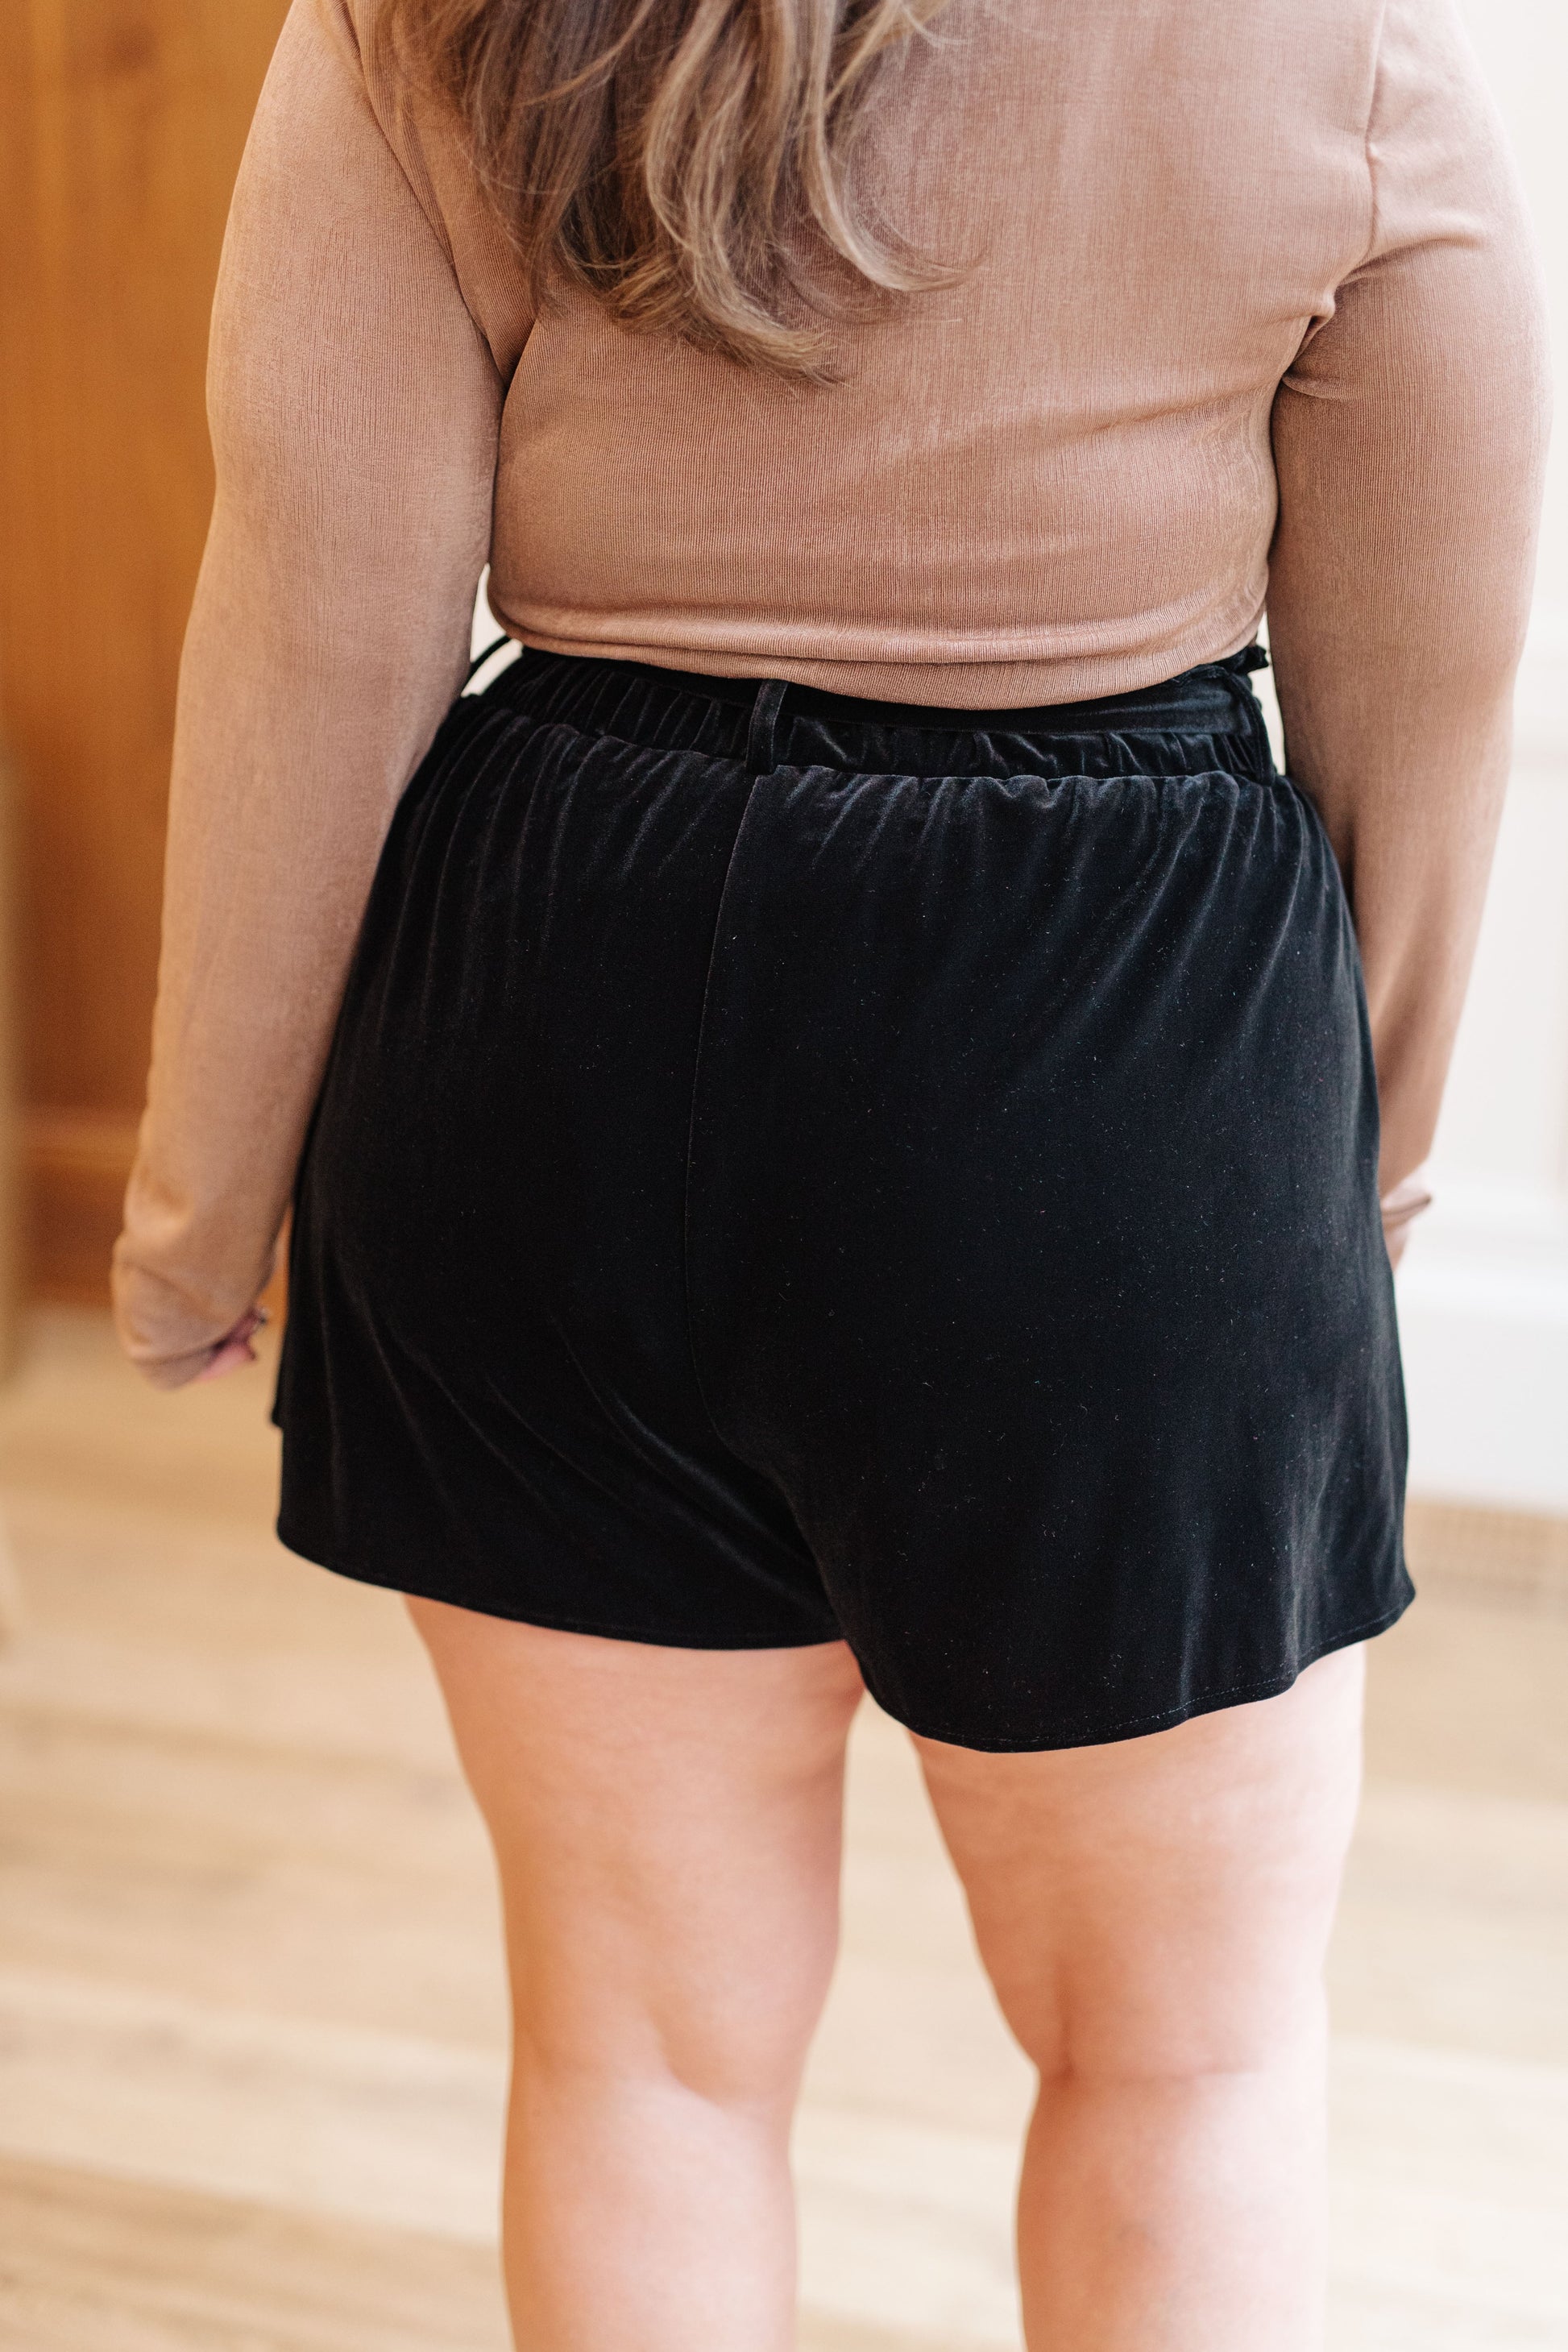 Wrapped in Velvet Shorts - Three Bears Boutique